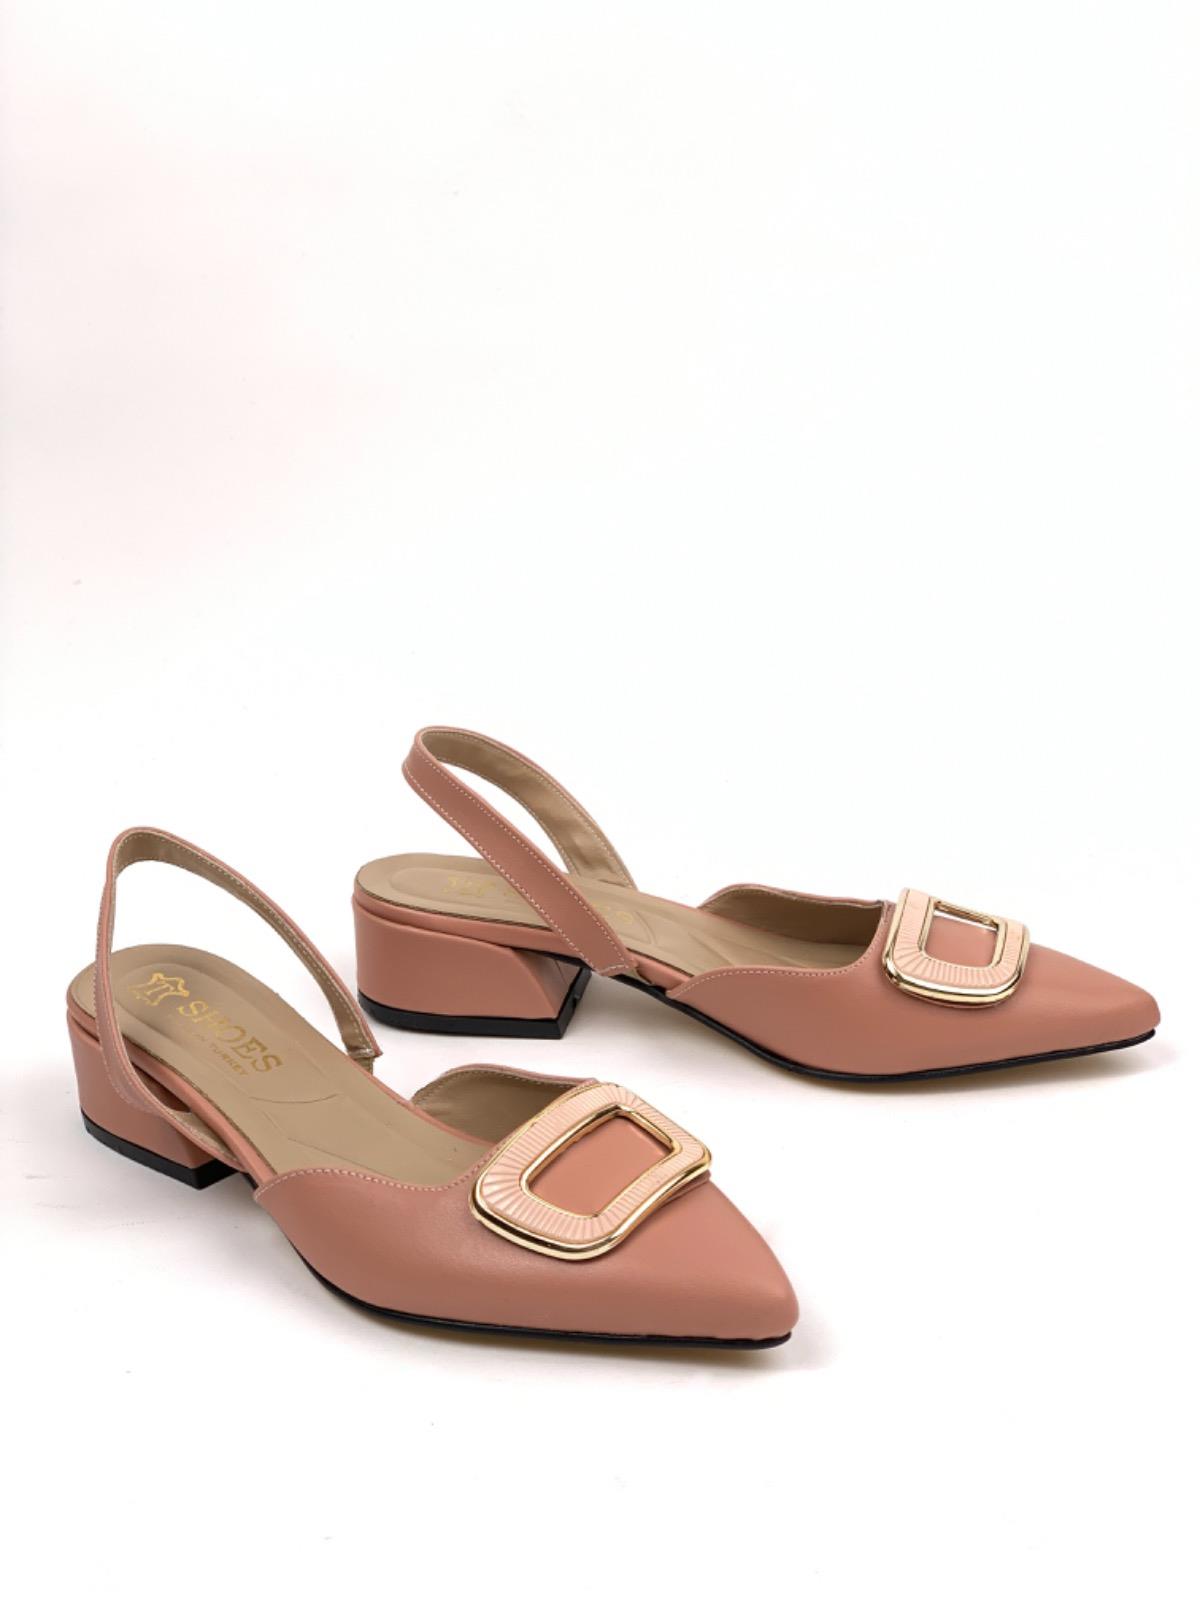 Women's Square Dusty Rose Low Heel Open Back Square Buckle Sandals Slippers - STREETMODE™